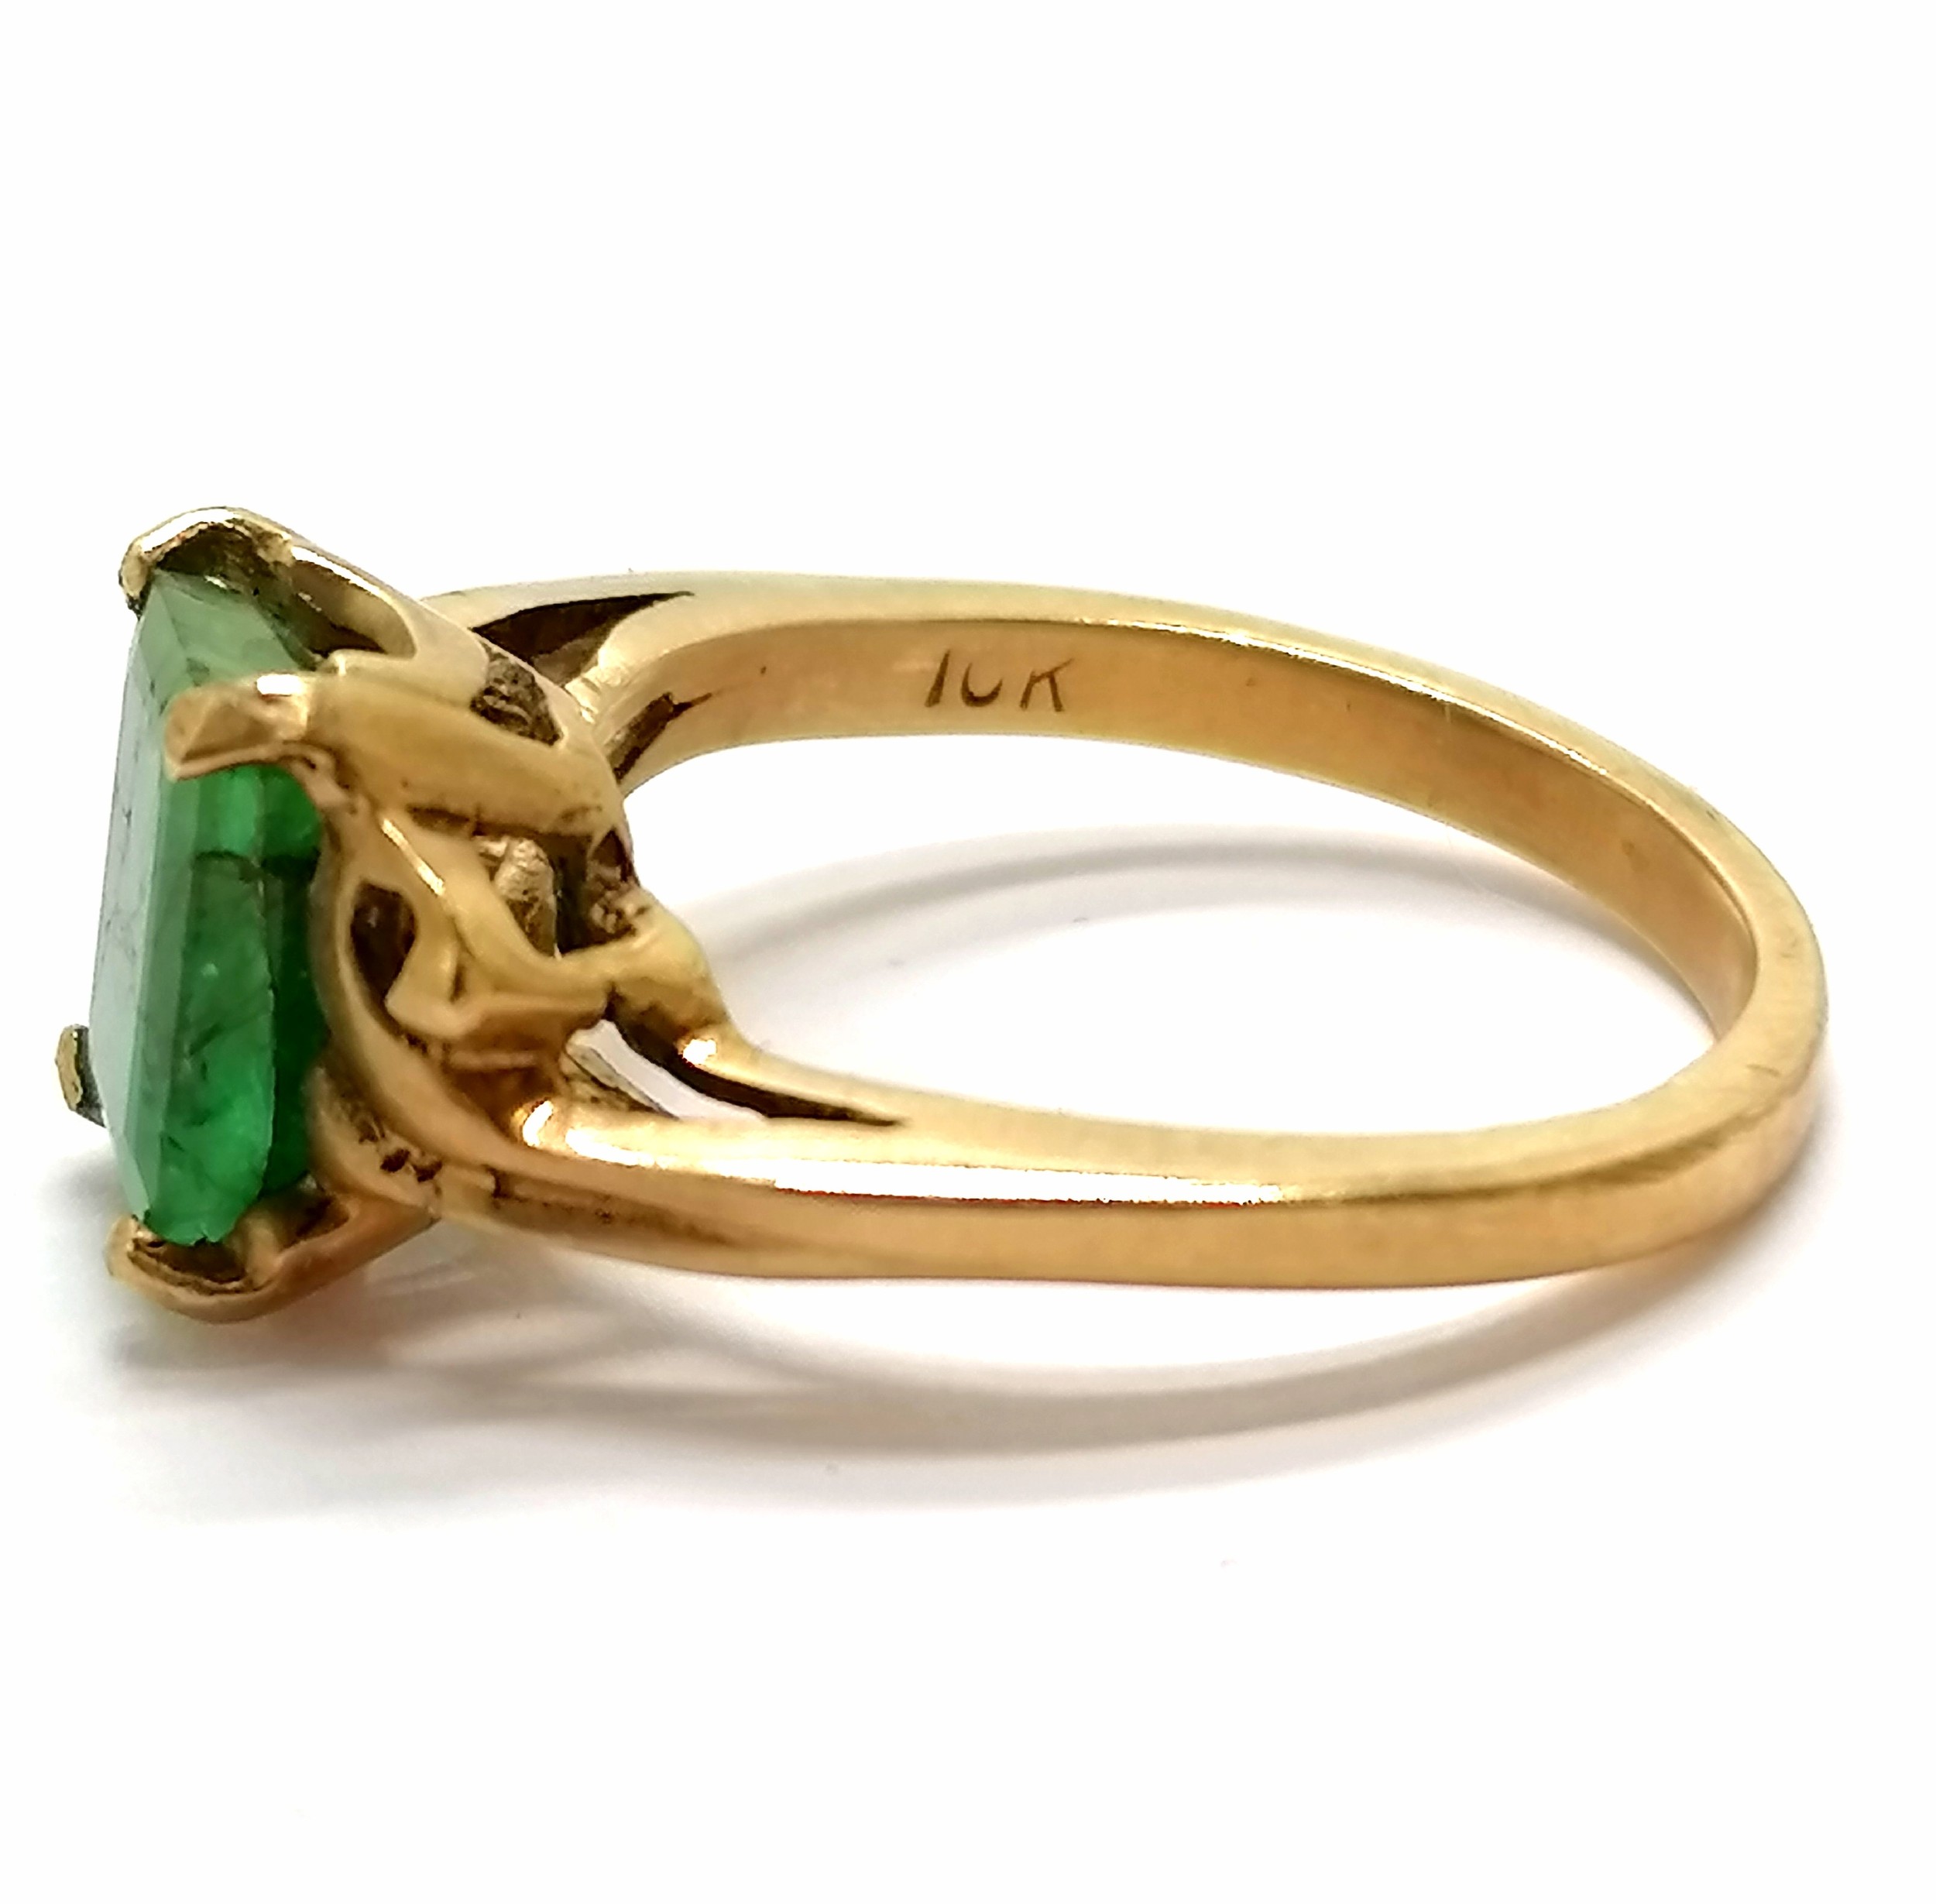 10ct marked gold emerald (?) set ring with fancy shoulders - size G½ & 2.5g total weight - SOLD ON - Image 2 of 4